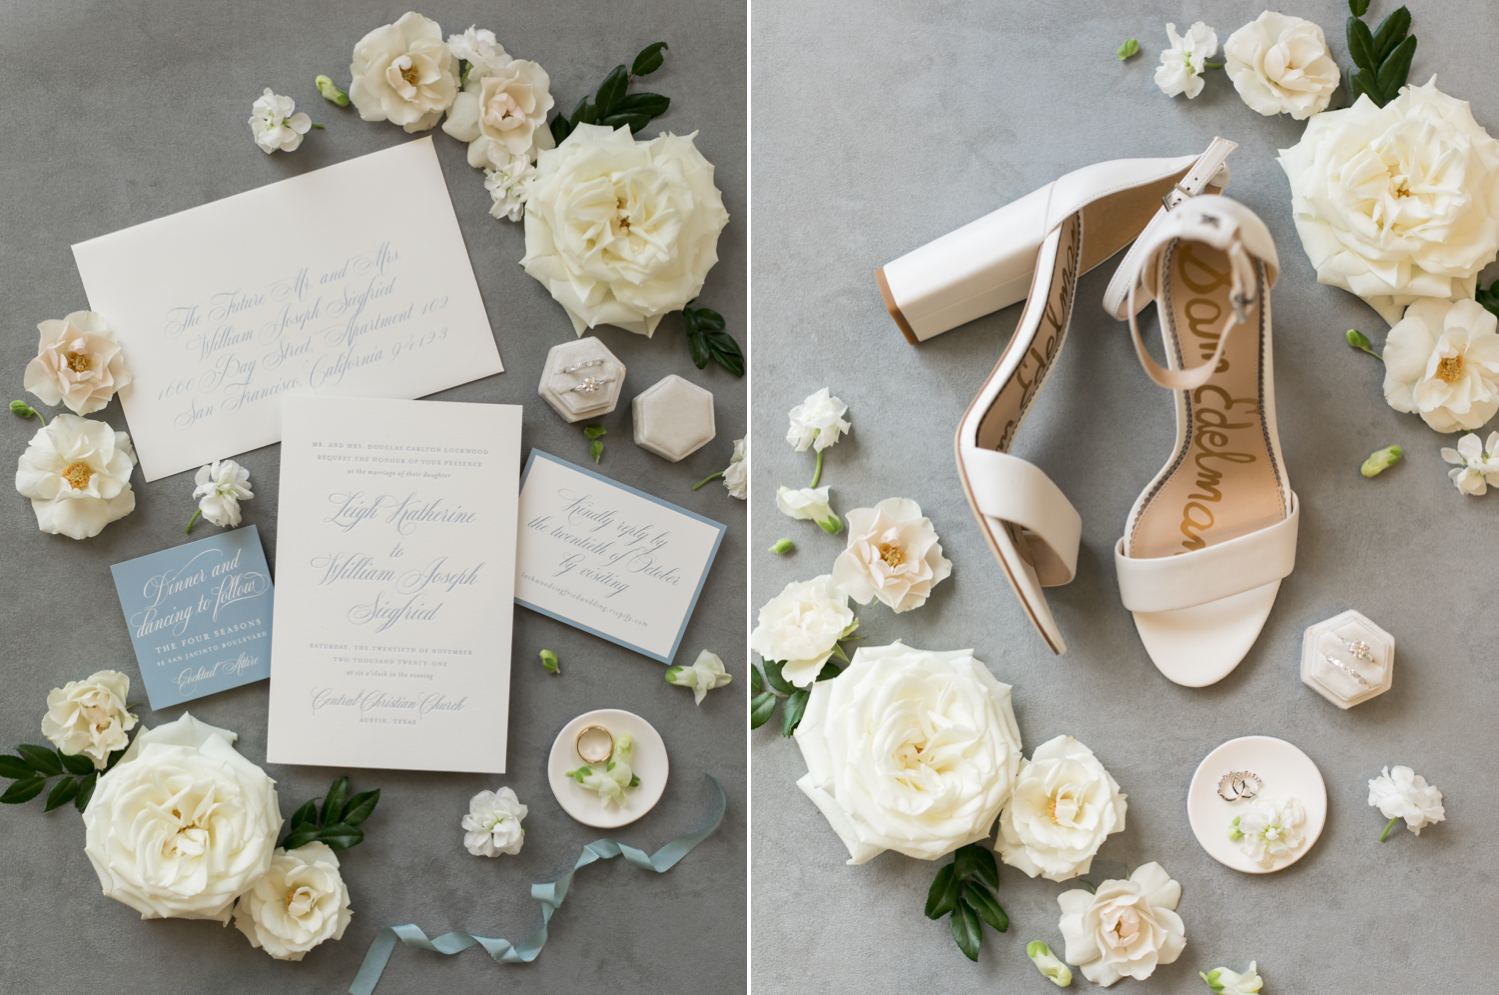 Left: The blue and white invitation suite surrounded by white roses. Right: the bride's white Sam Edelman heels surrounded by white roses